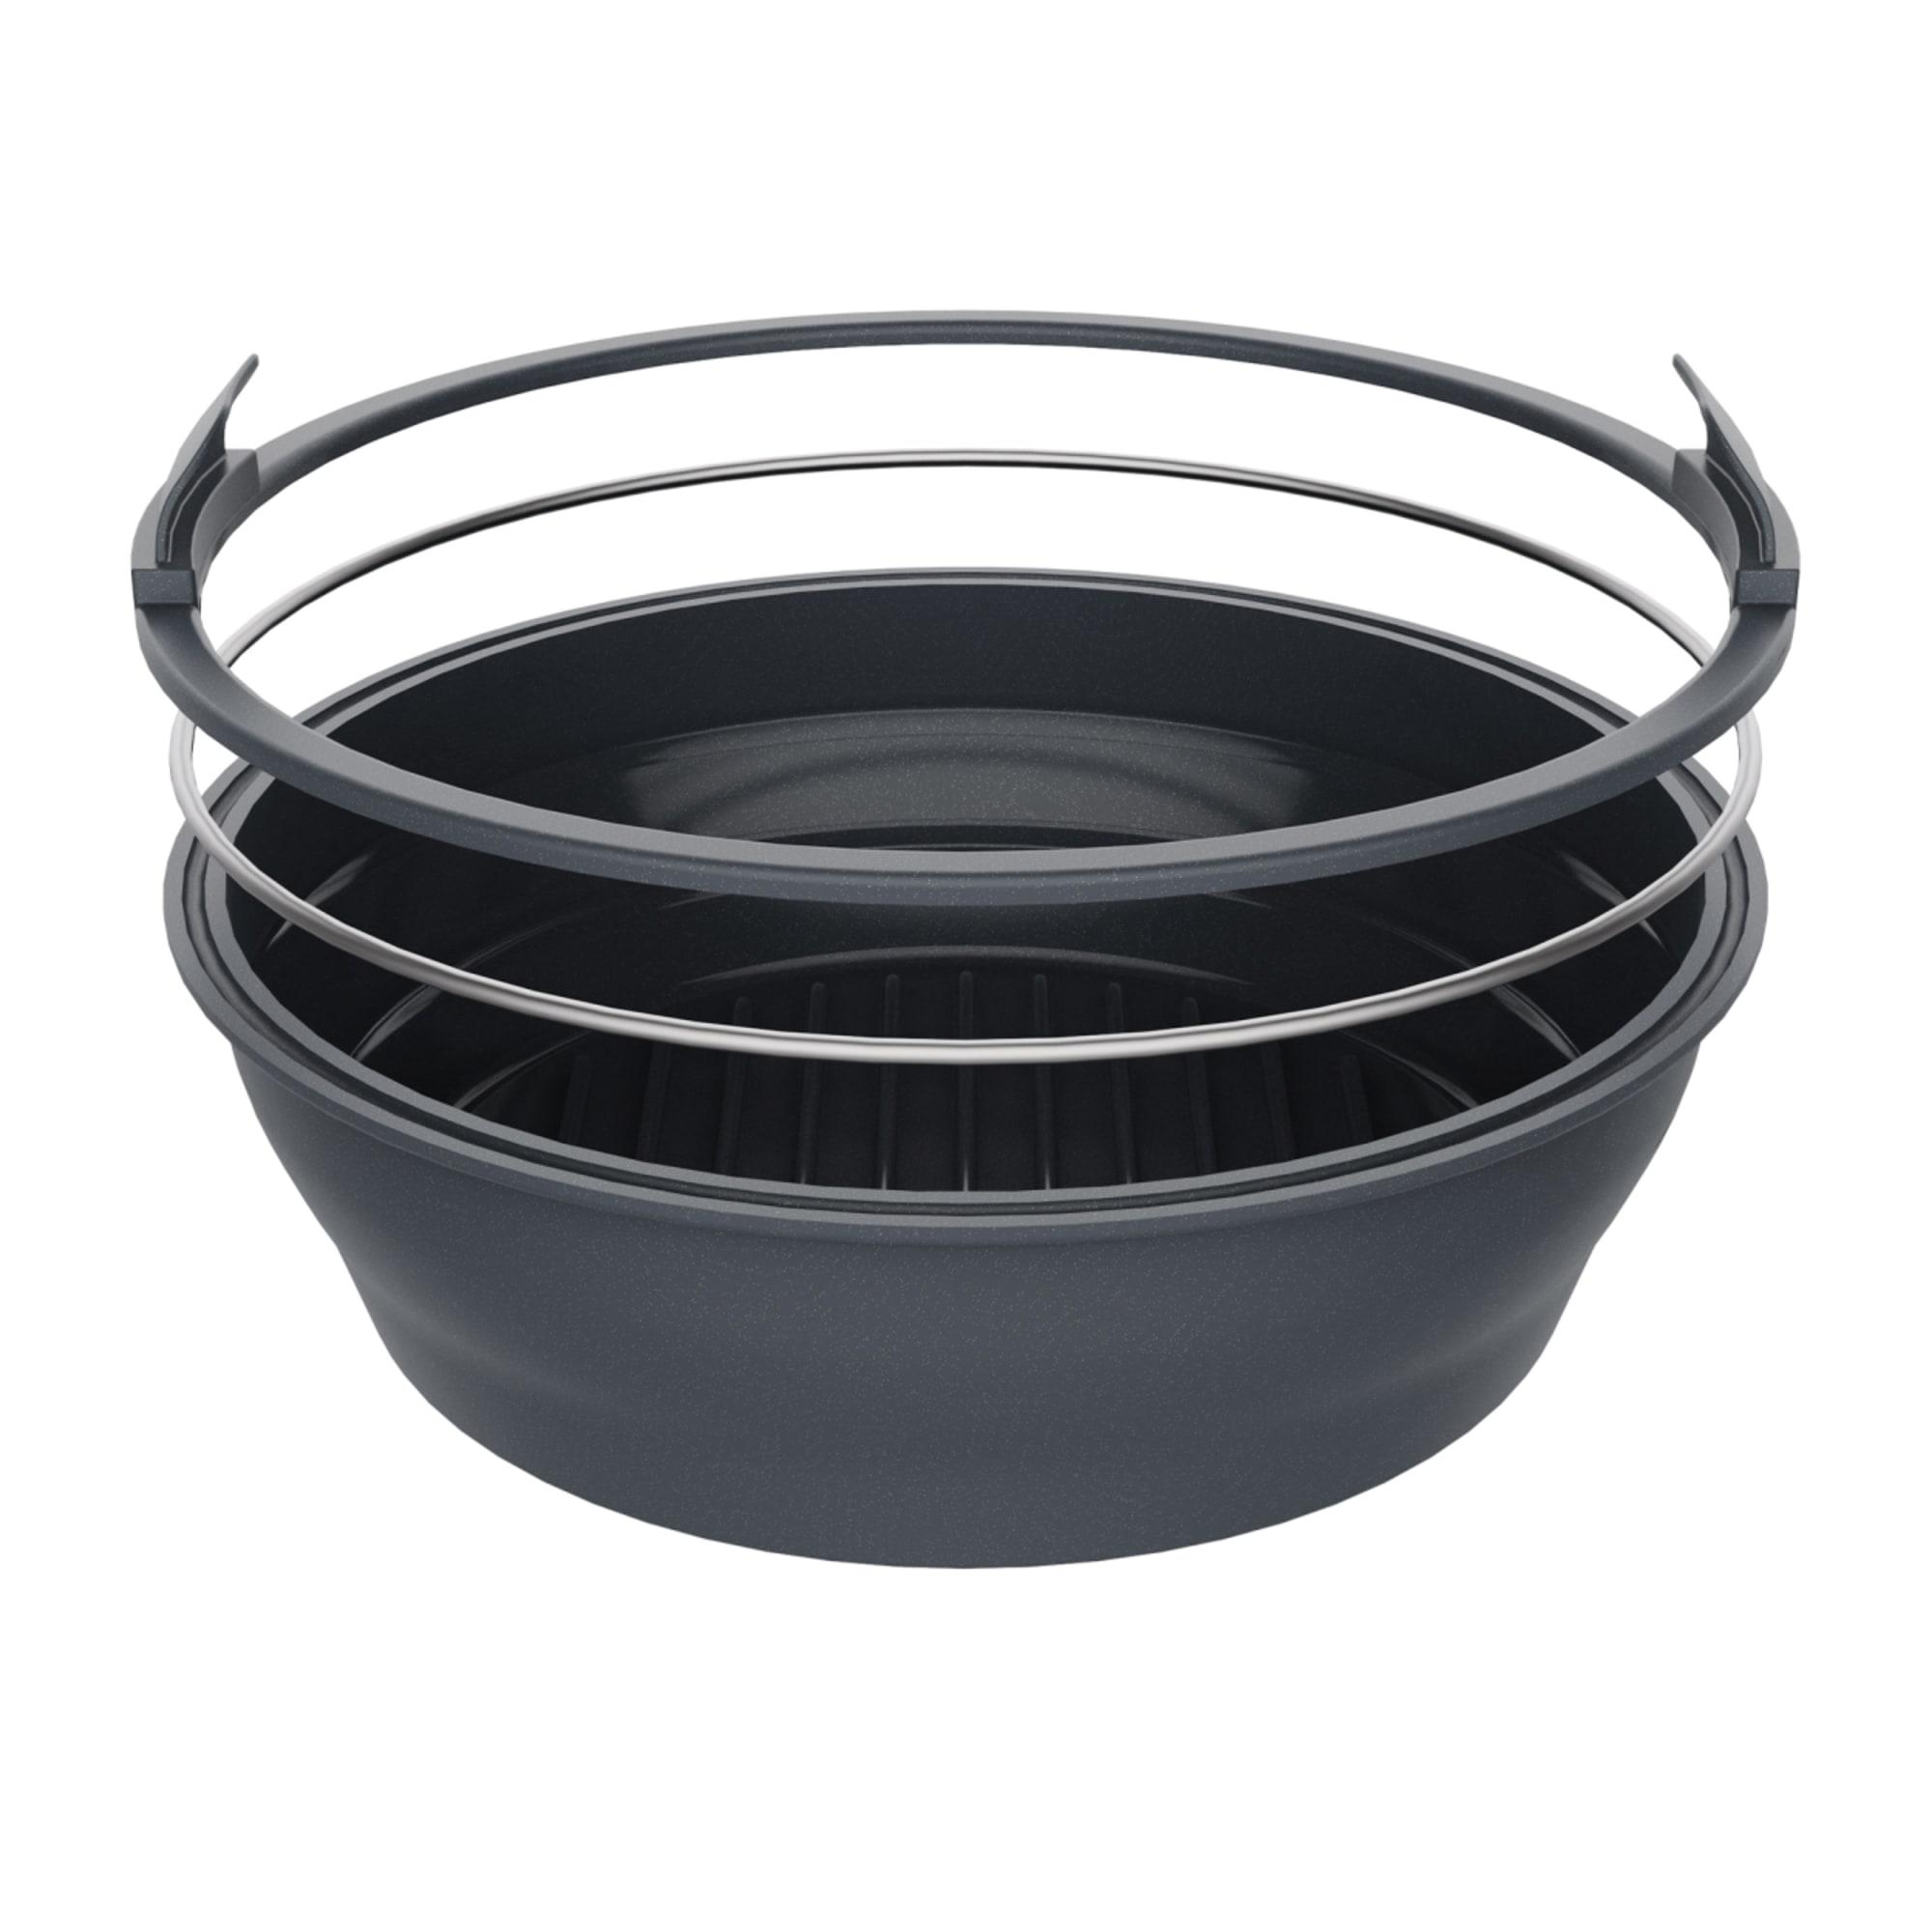 Daily Bake Silicone Round Collapsible Air Fryer Basket 22cm Image 5